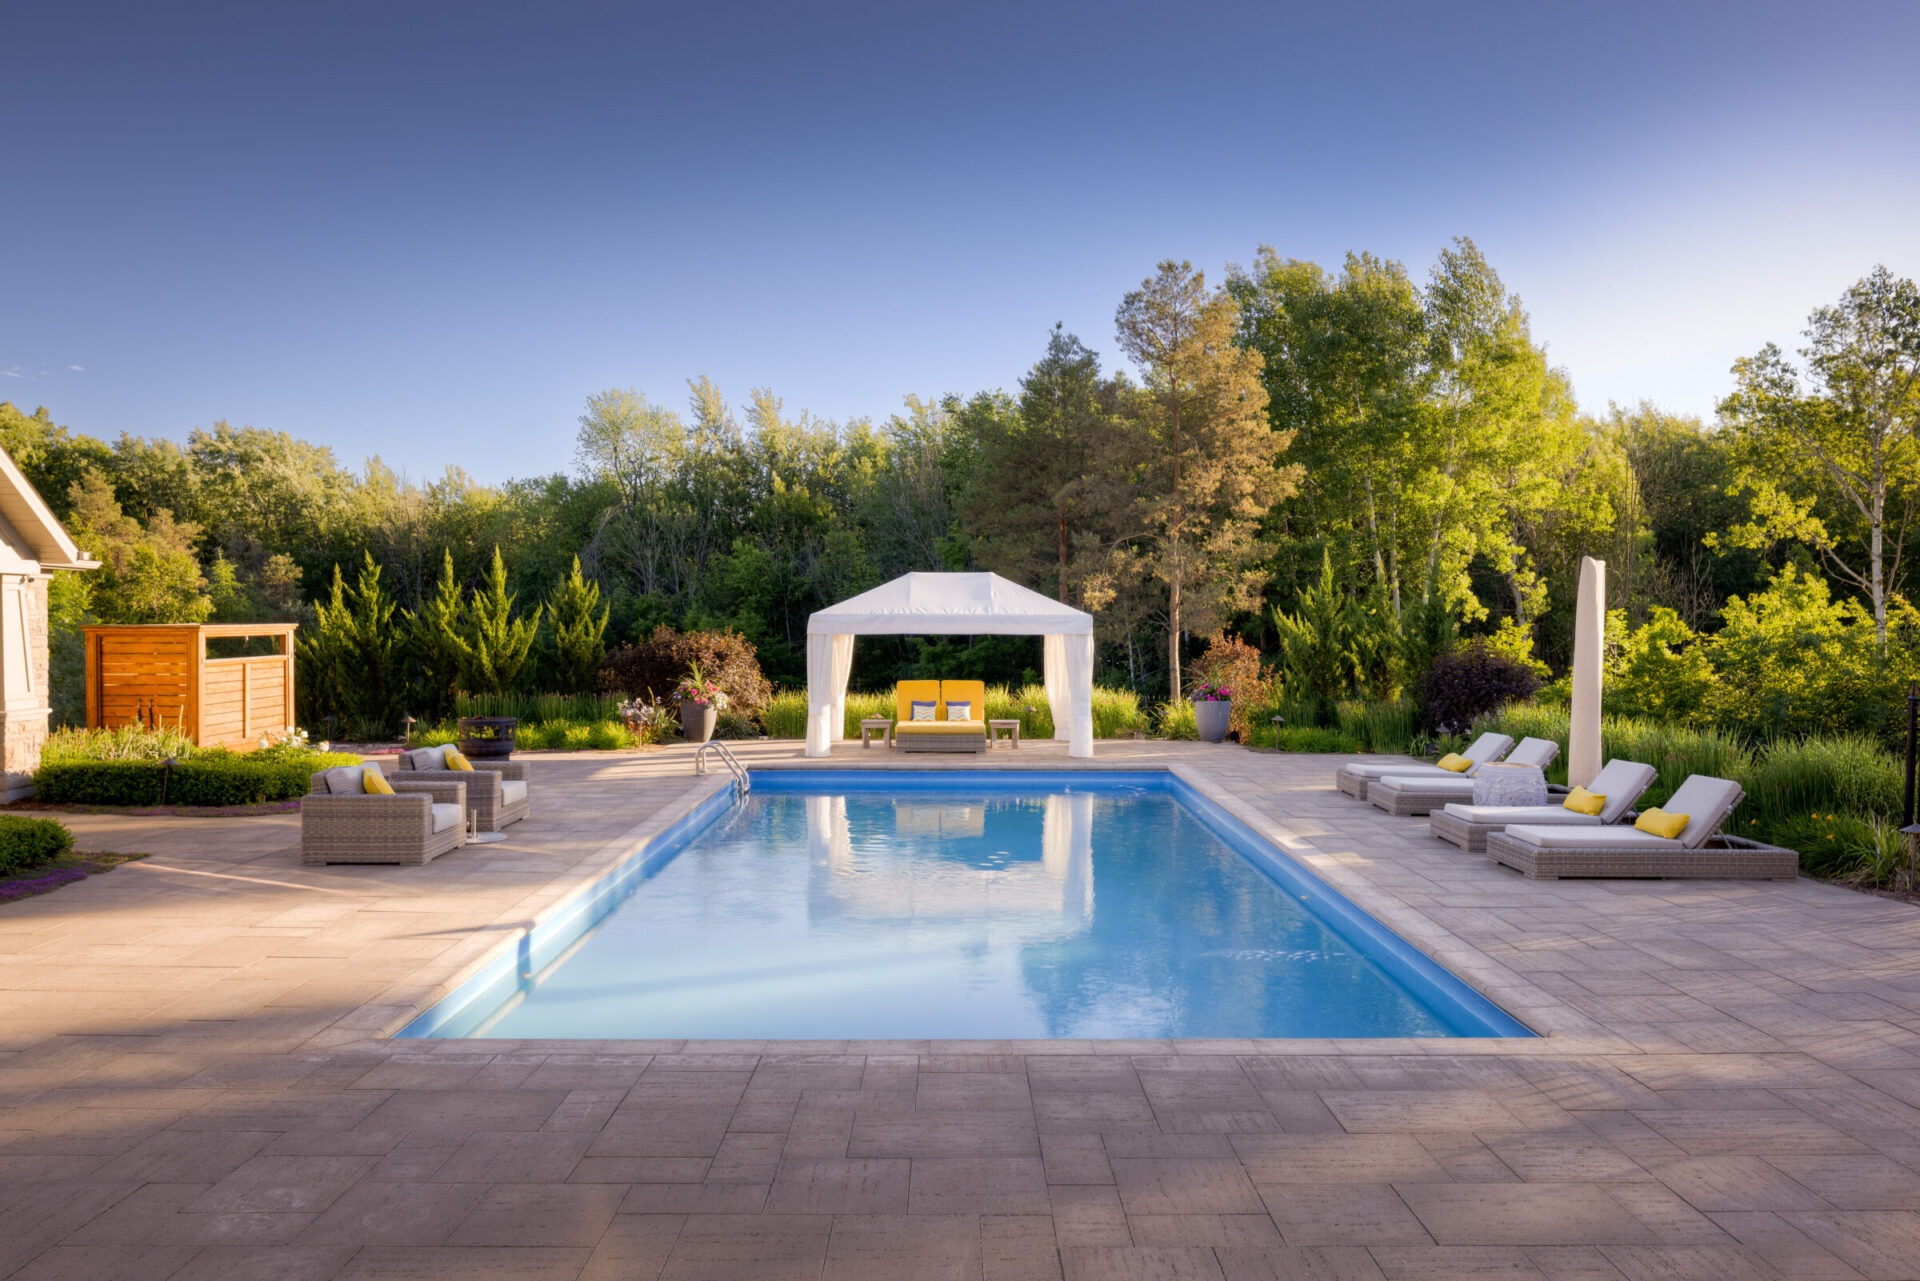 An outdoor swimming pool with loungers and a white canopy, surrounded by a patio and lush greenery, under a clear sky during the day.